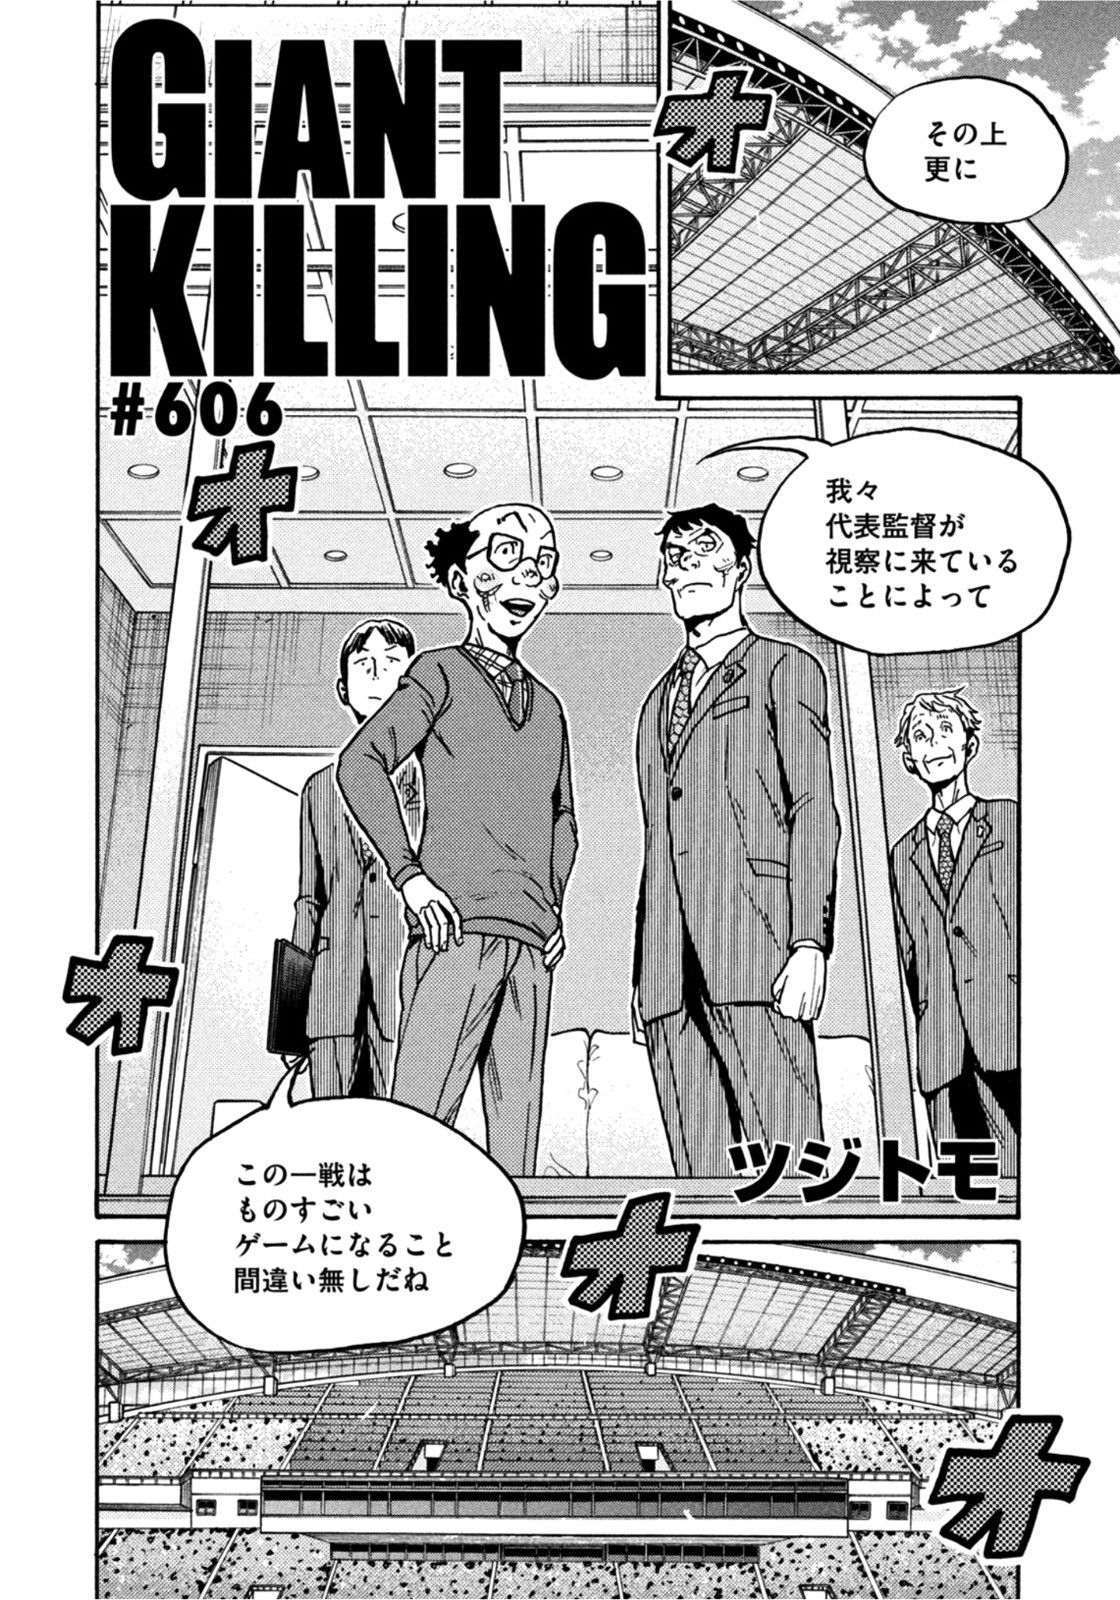 Giant Killing - Chapter 606 - Page 2